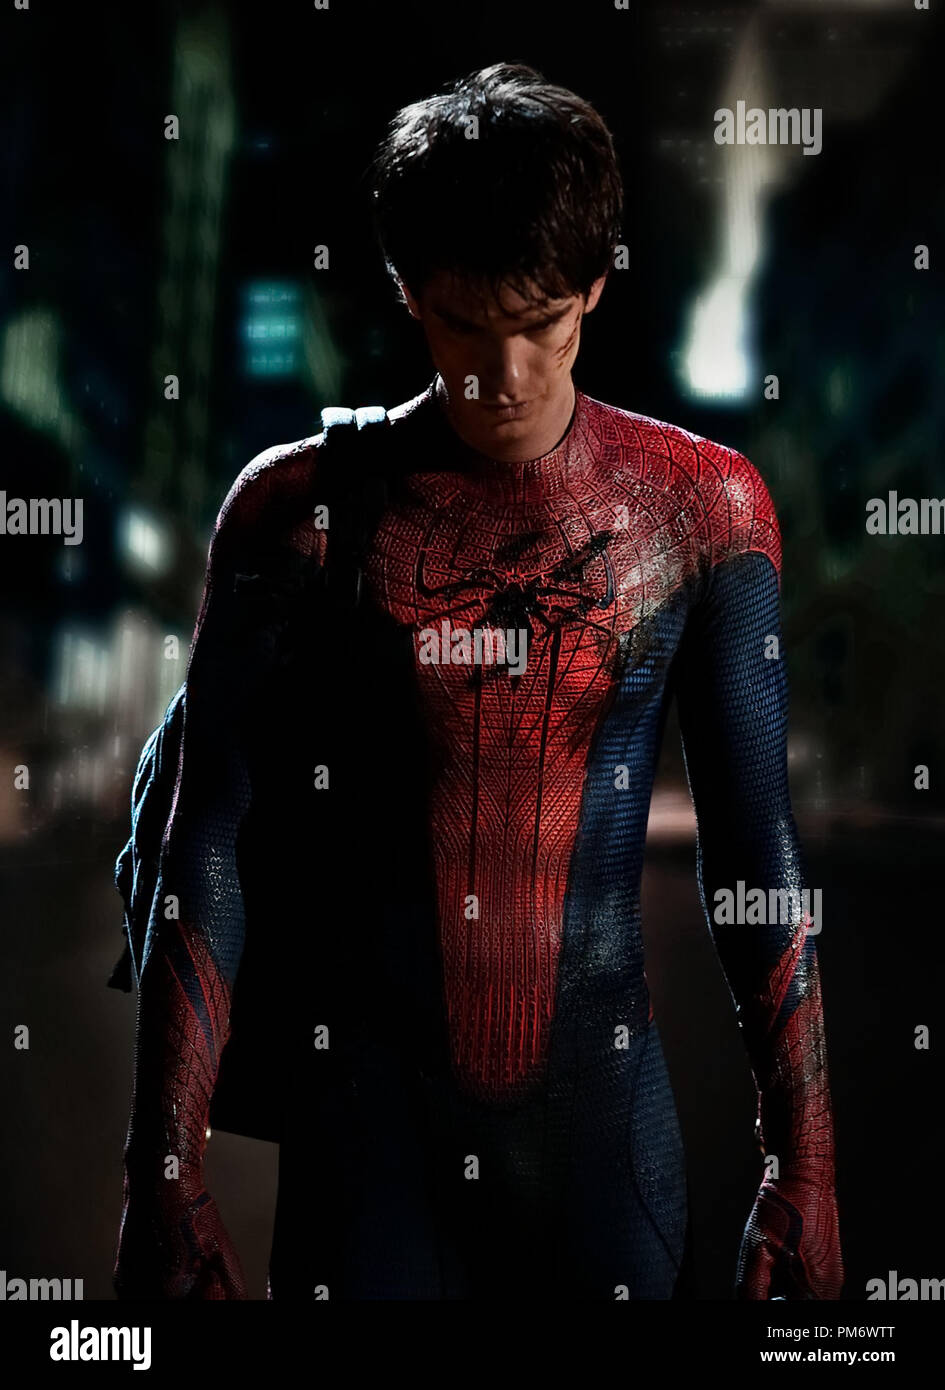 Andrew Garfield Stars wie Peter Parker/Spider-Man in Columbia Pictures' "The Amazing Spider-Man" Stockfoto